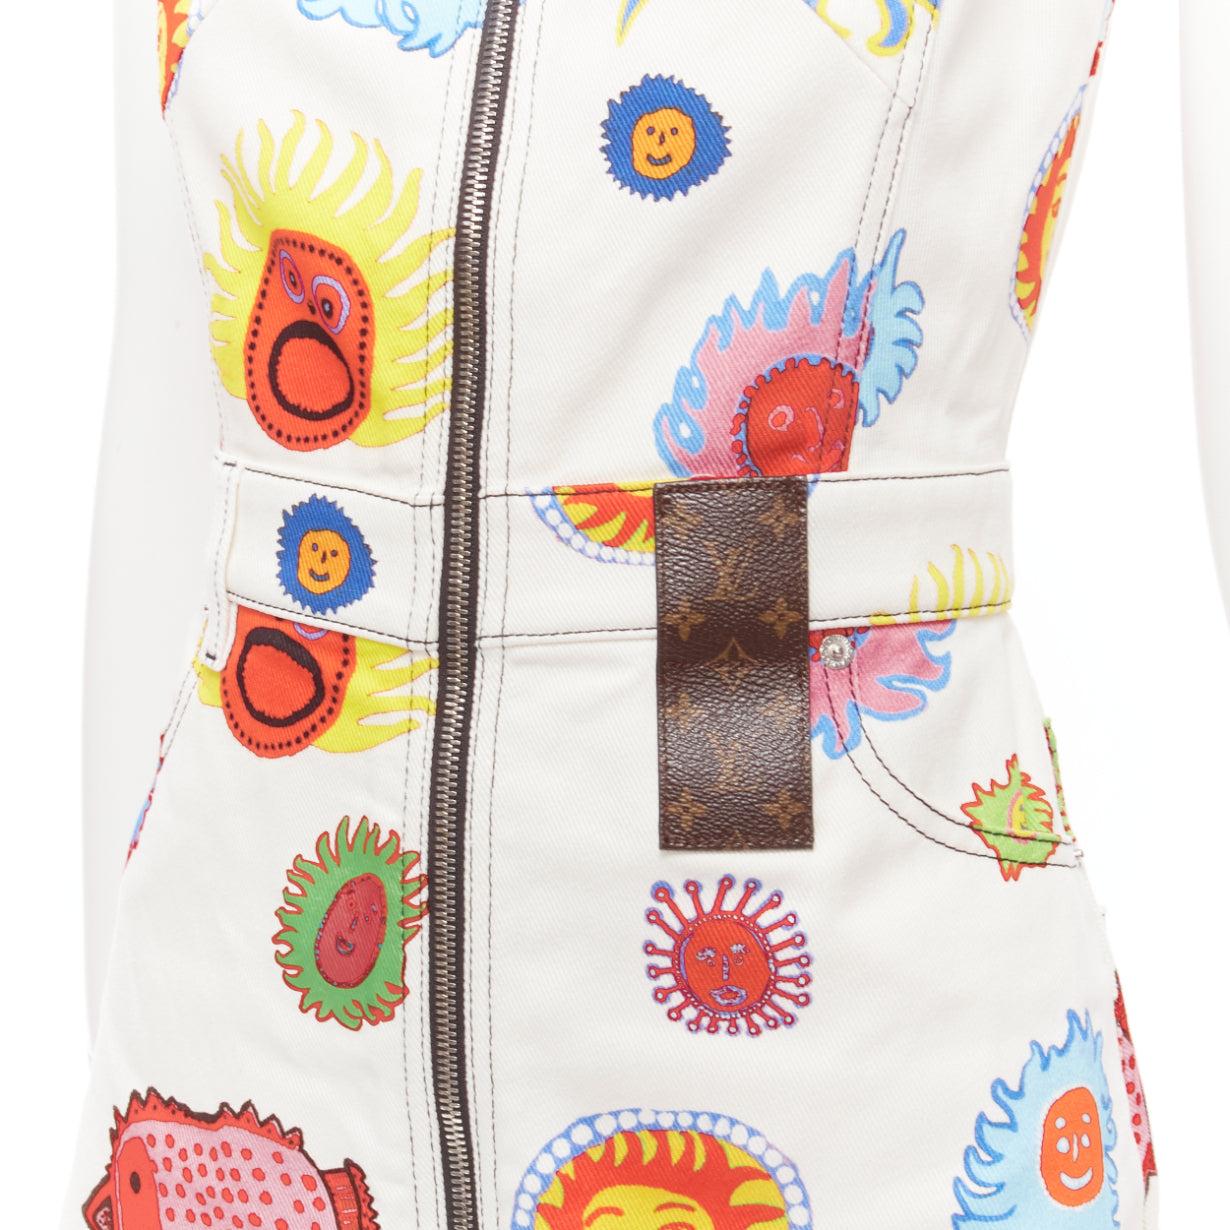 LOUIS VUITTON 2023 Yayoi Kusama Sun Faces white denim monogram patch zip up dress FR34 XS
Reference: AAWC/A00507
Brand: Louis Vuitton
Model: 1AB7ON
Collection: Yayoi Kusama 2023 - Runway
Material: Cotton
Color: White, Multicolour
Pattern: